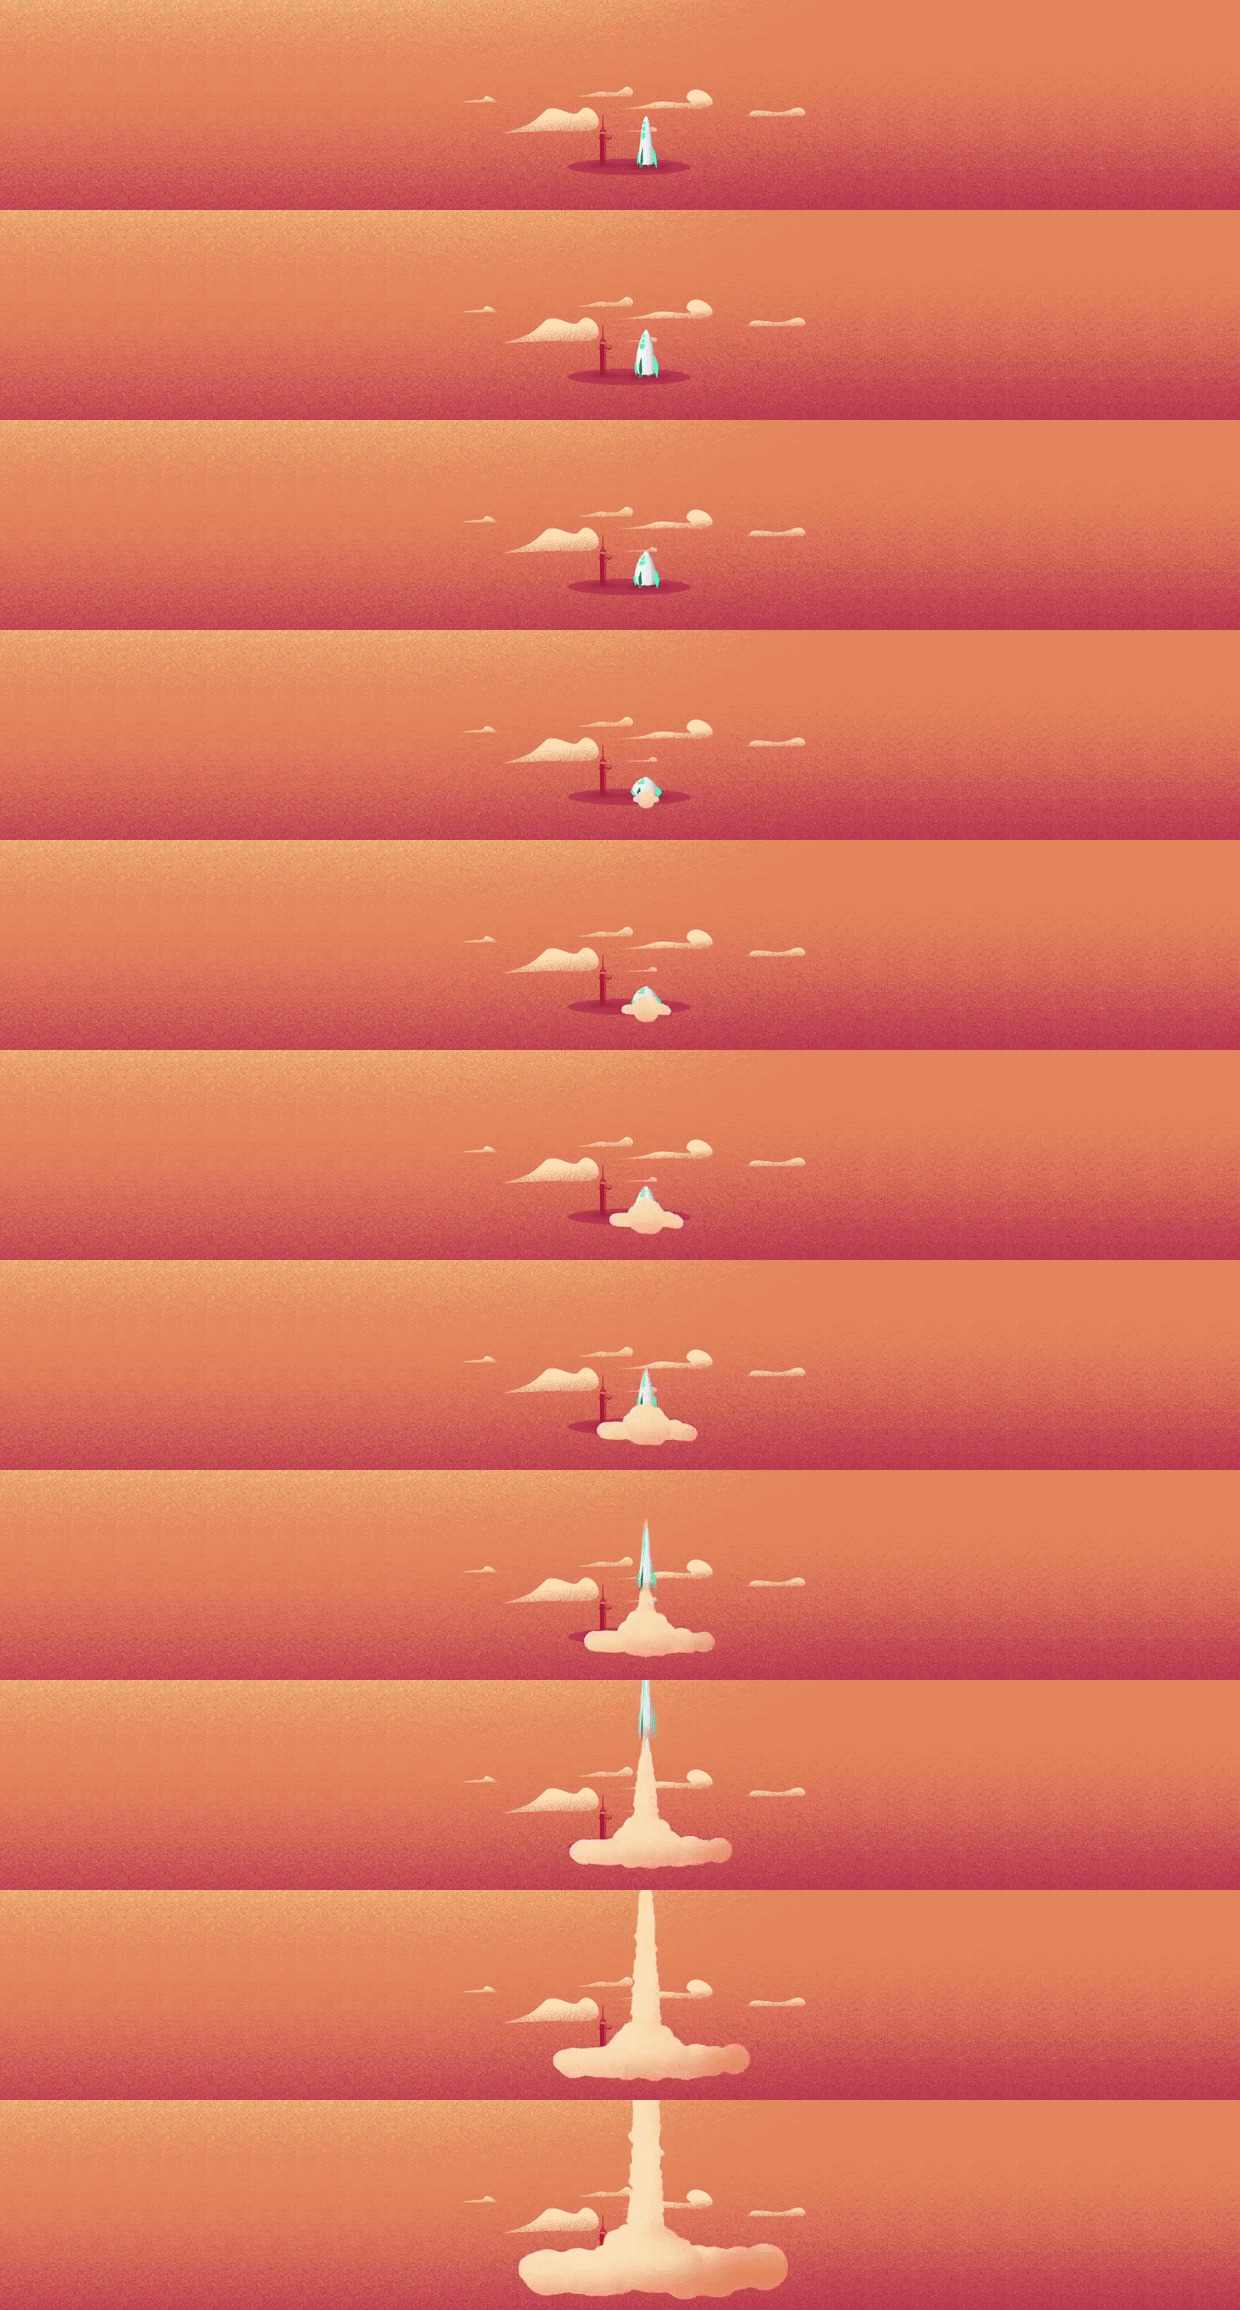 This example animates a cartoon of a rocket launch from a vertical JPG sprite strip image. To make it work, we set the sprite size to 350x210, set the sprite direction to go from top to bottom (north to south), and enable the GIF player. Since there is a lot of extra space around the rocket, we move the bounding frame rectangle to the right by 460 pixels (x-offset). We display the GIF in its original size (100%) and update the frame delay to 200 milliseconds. (Source: Nasa.)